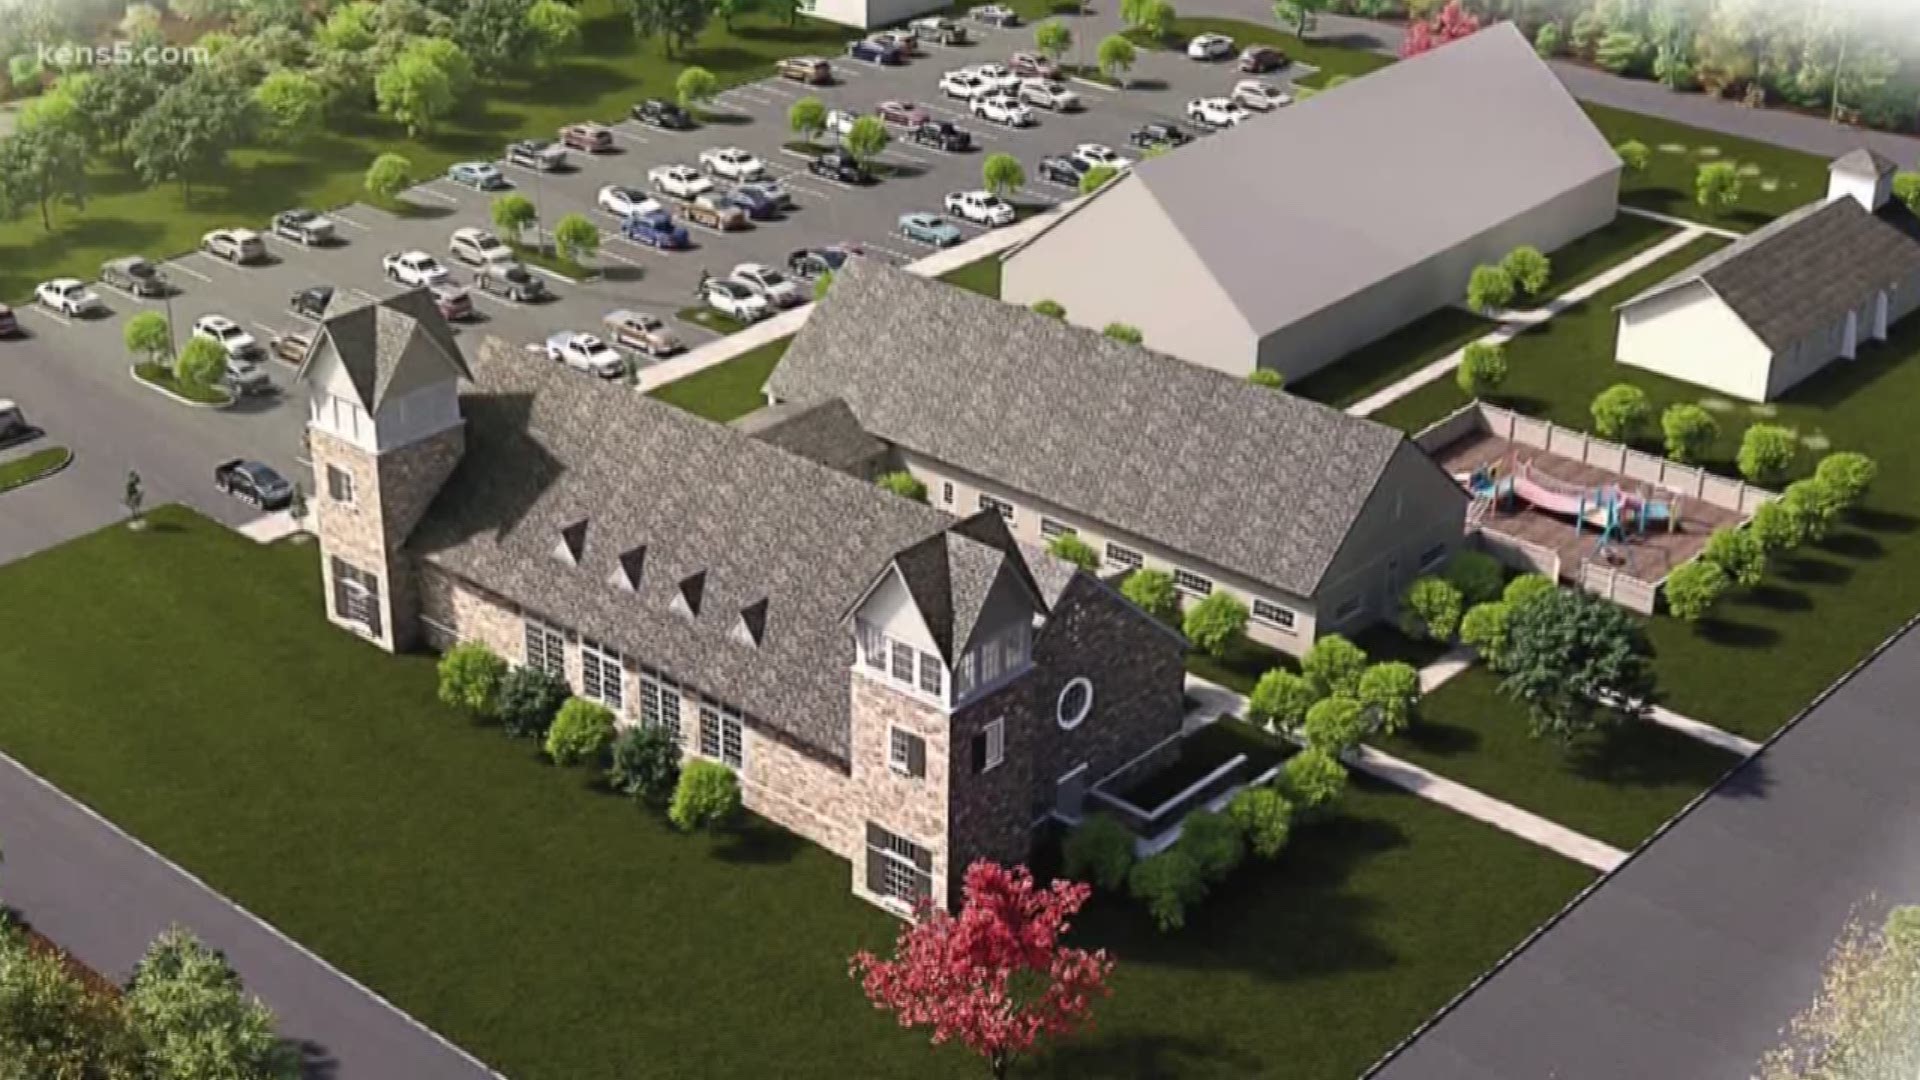 After a gunman slaughtered 26 people inside the First Baptist Church of Sutherland Springs, the congregation has a plan to rebuild. It's a multi-million dollar construction project that will include a worship center with a memorial tower.